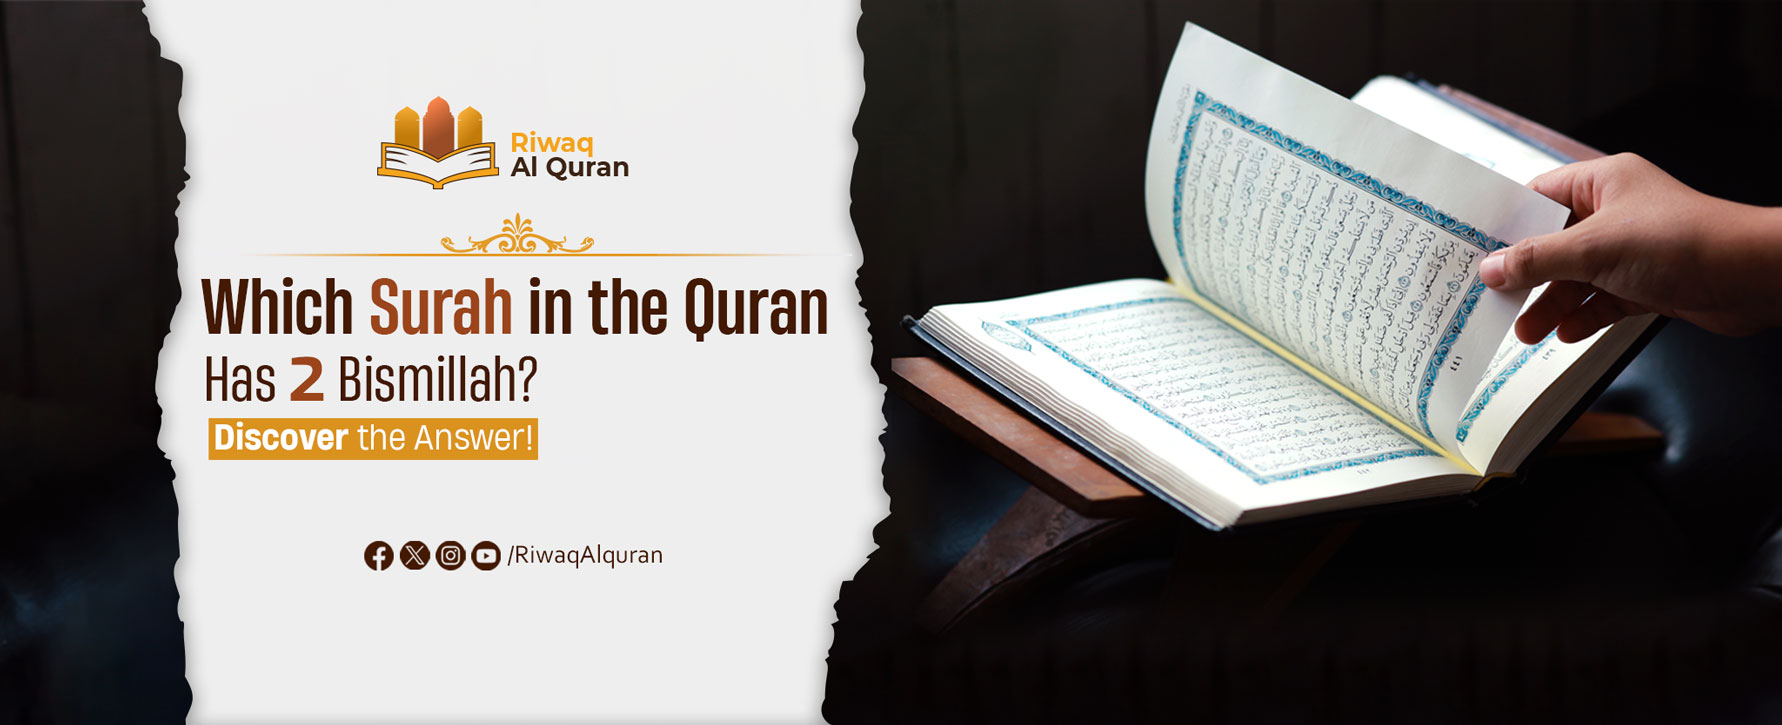 Which Surah in the Quran Has 2 Bismillah?